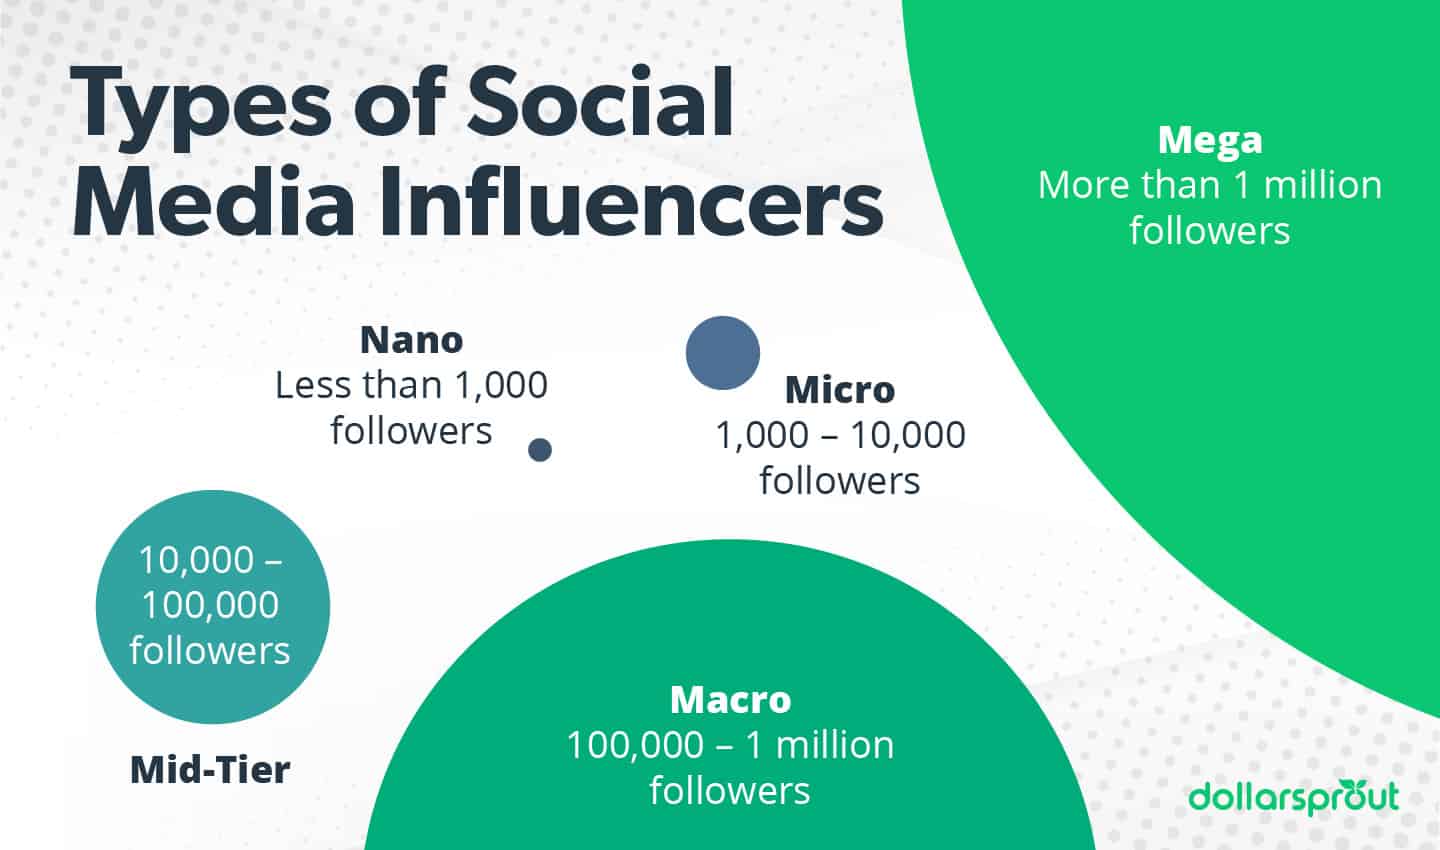 Types of Social Media Influencers